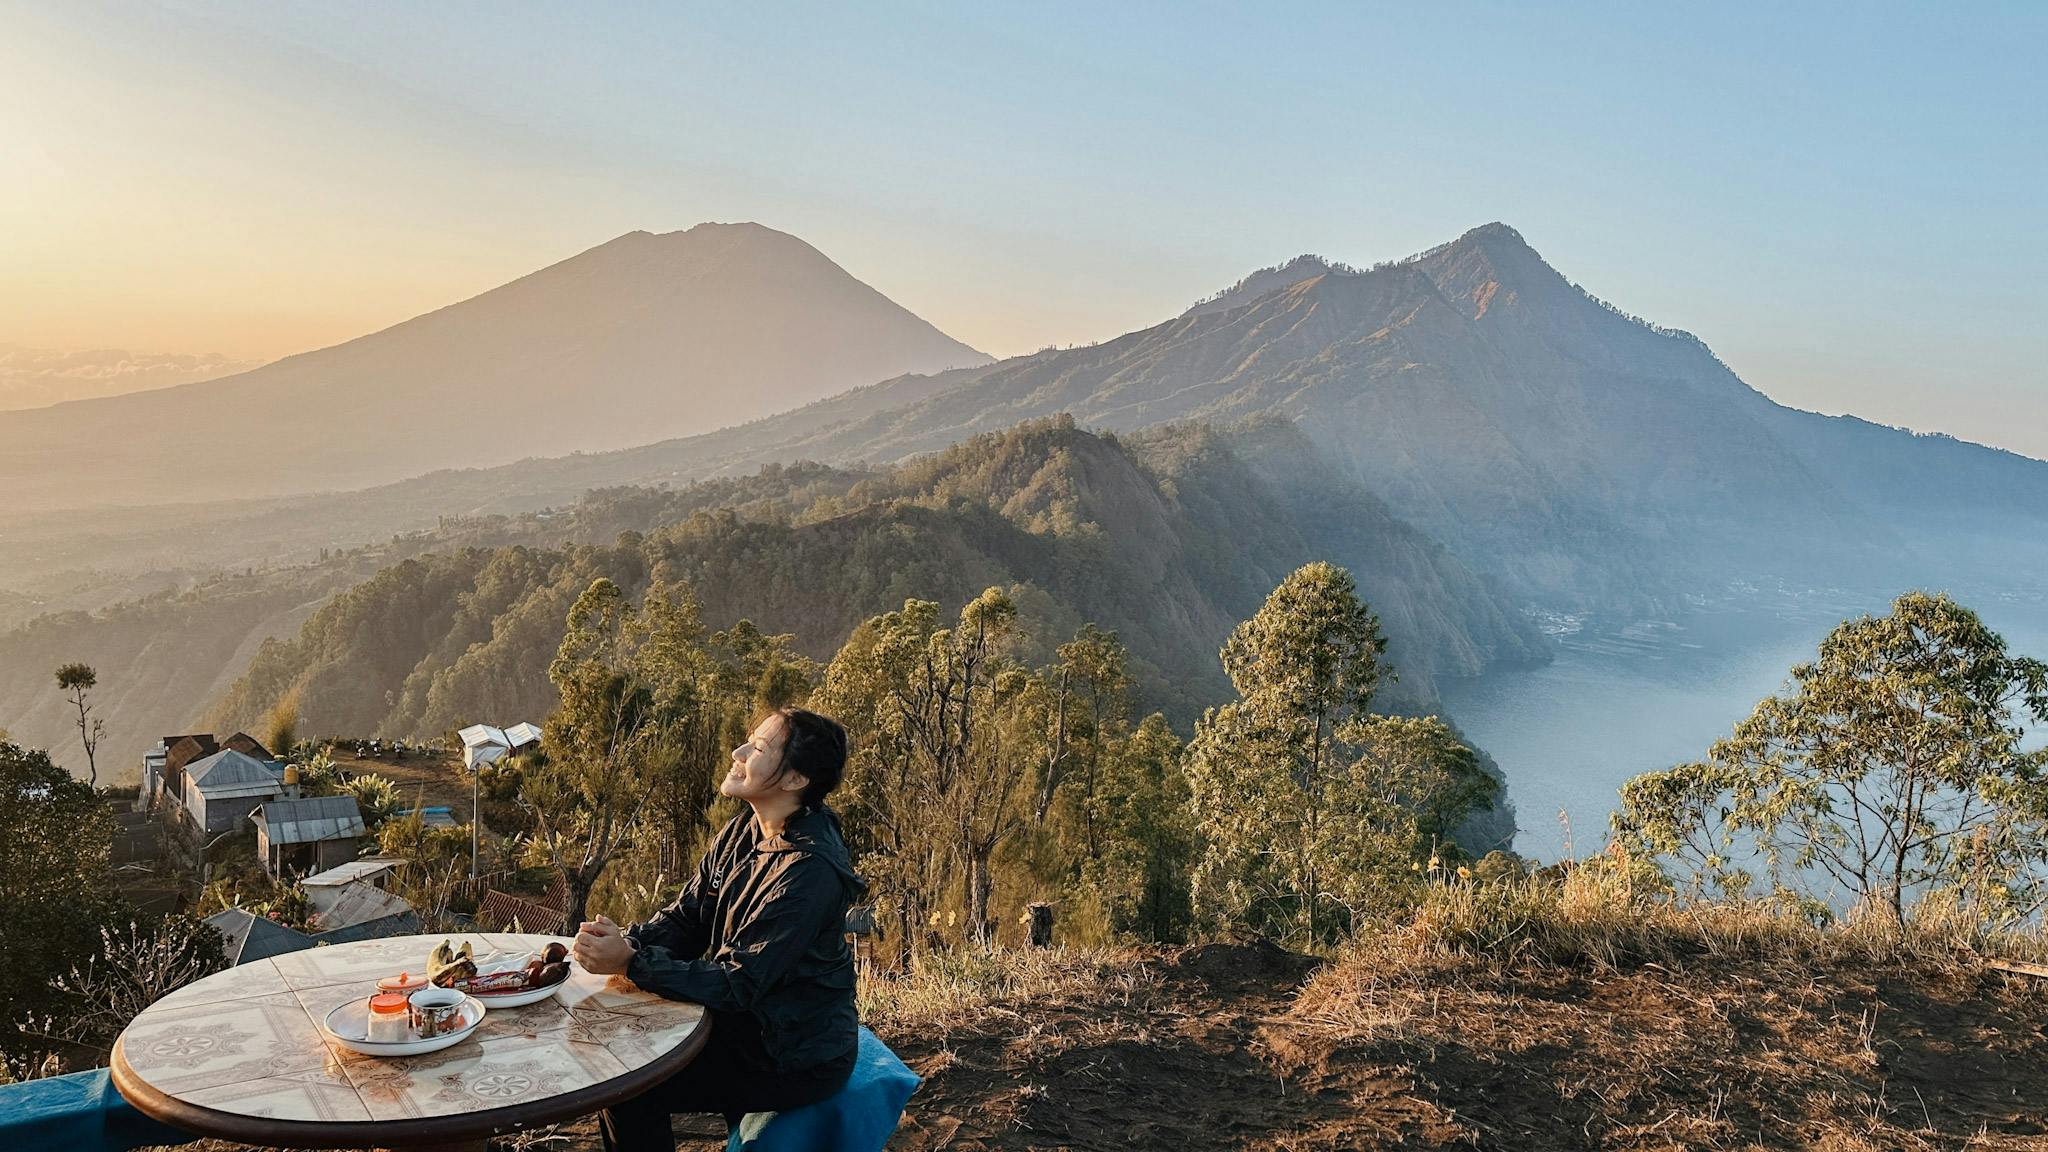 Can I see Mount Batur without the crowds?